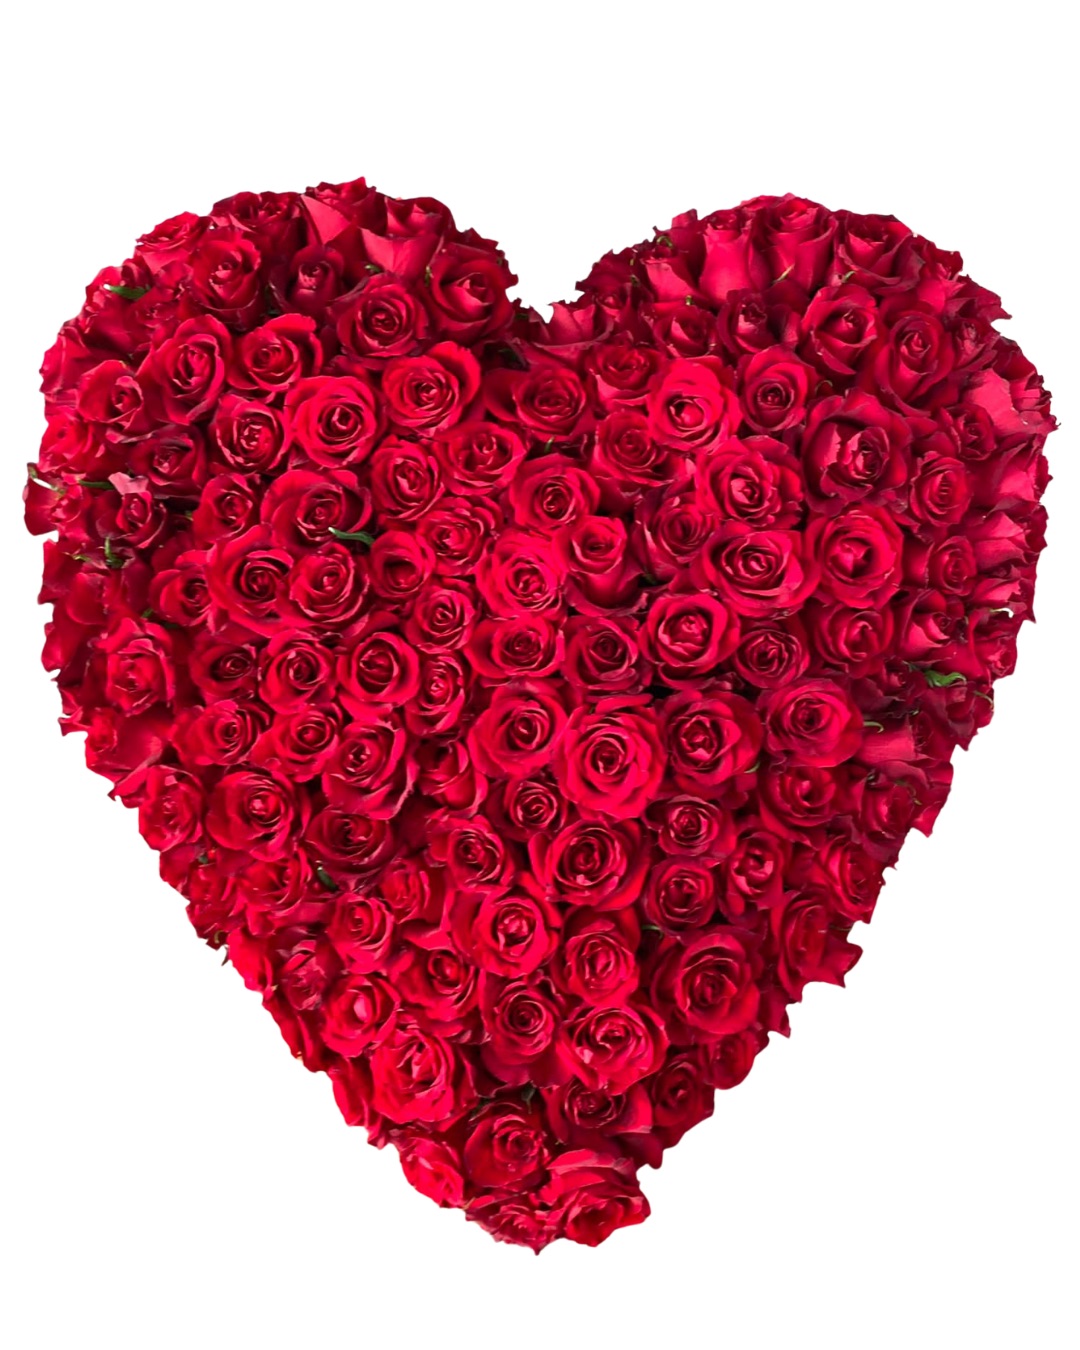 Heart of 50 Red Roses "I'm Hung With Love"